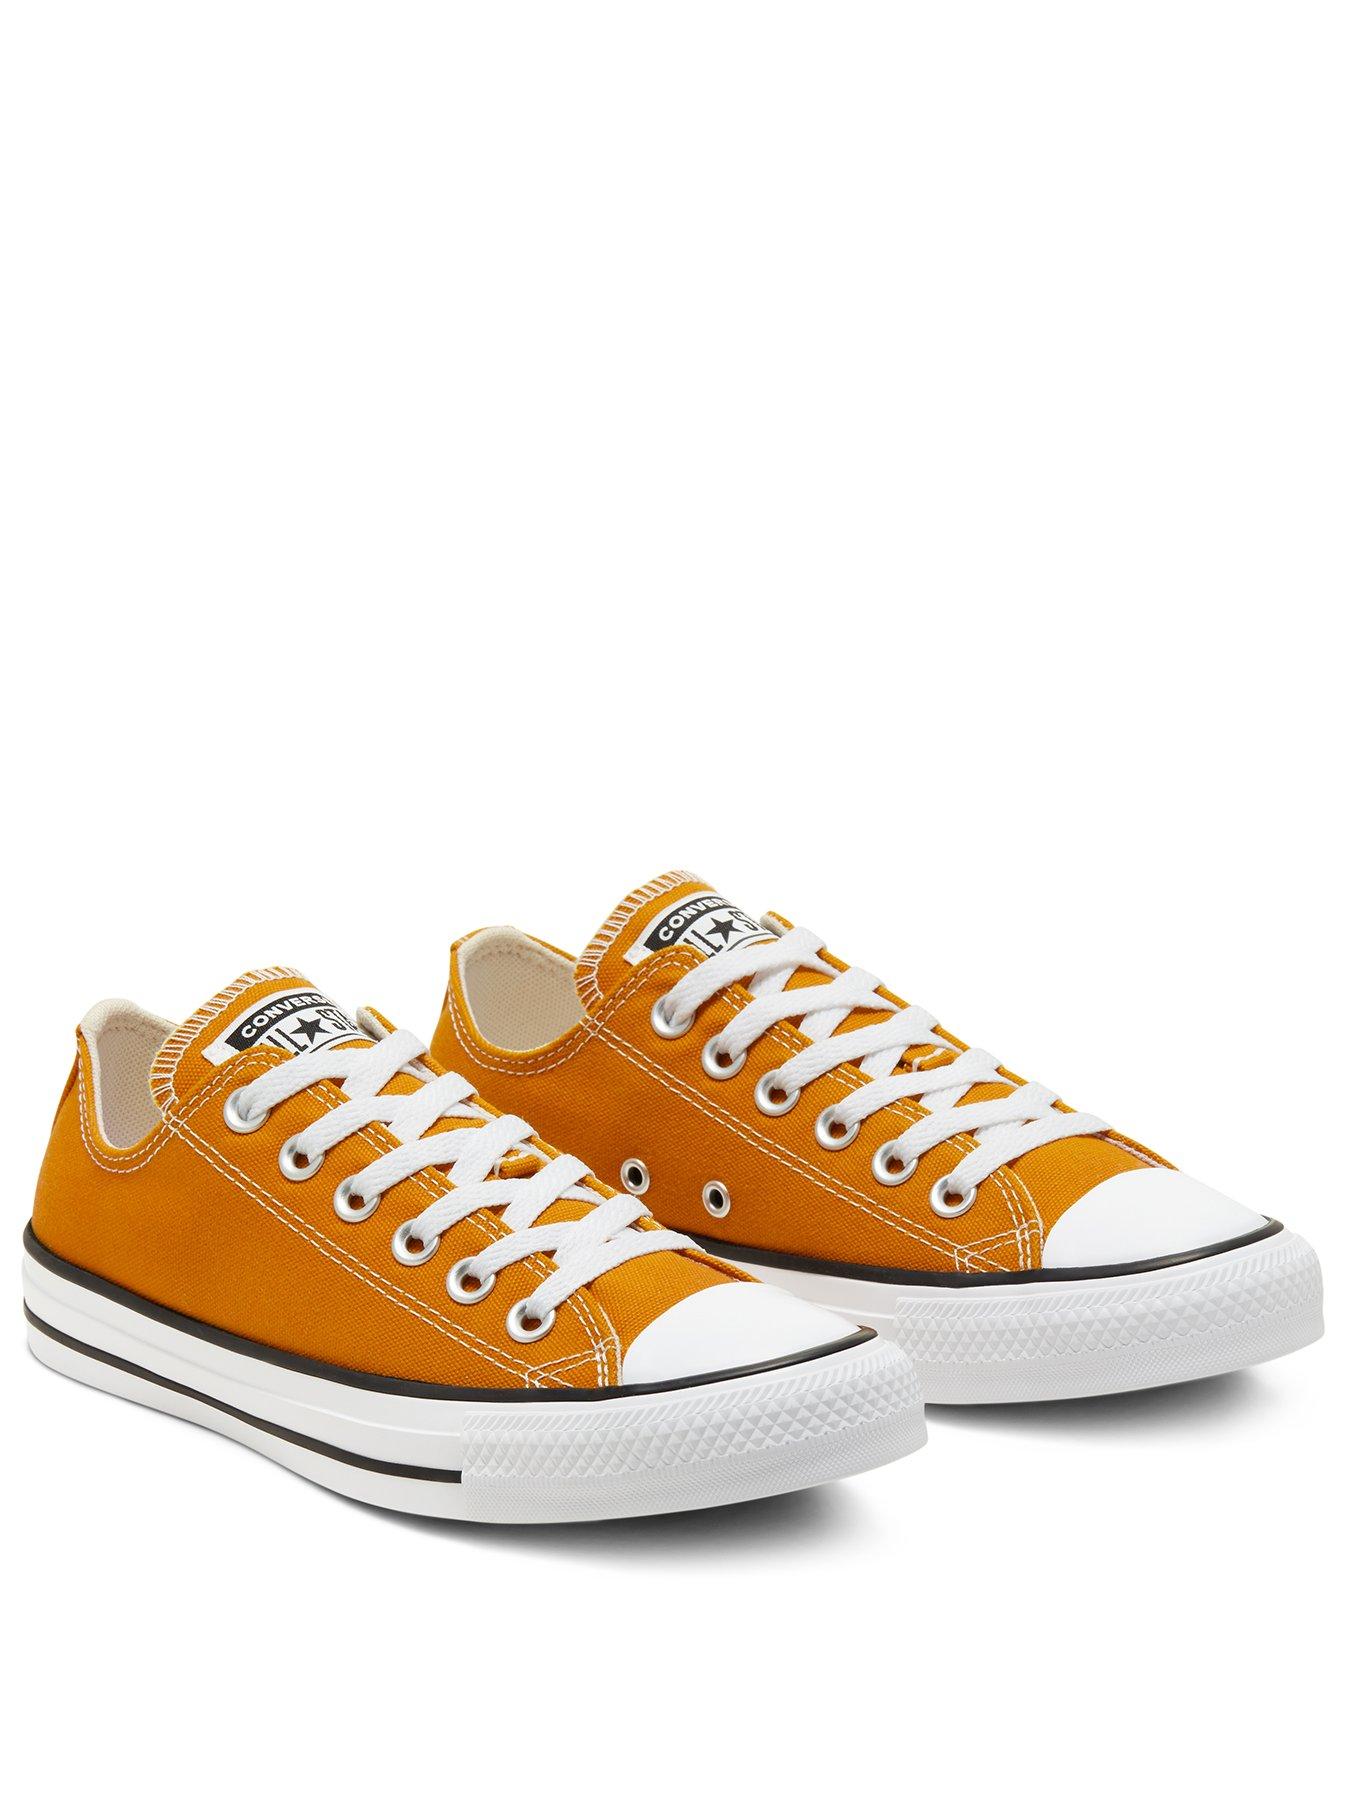 converse all star ox yellow